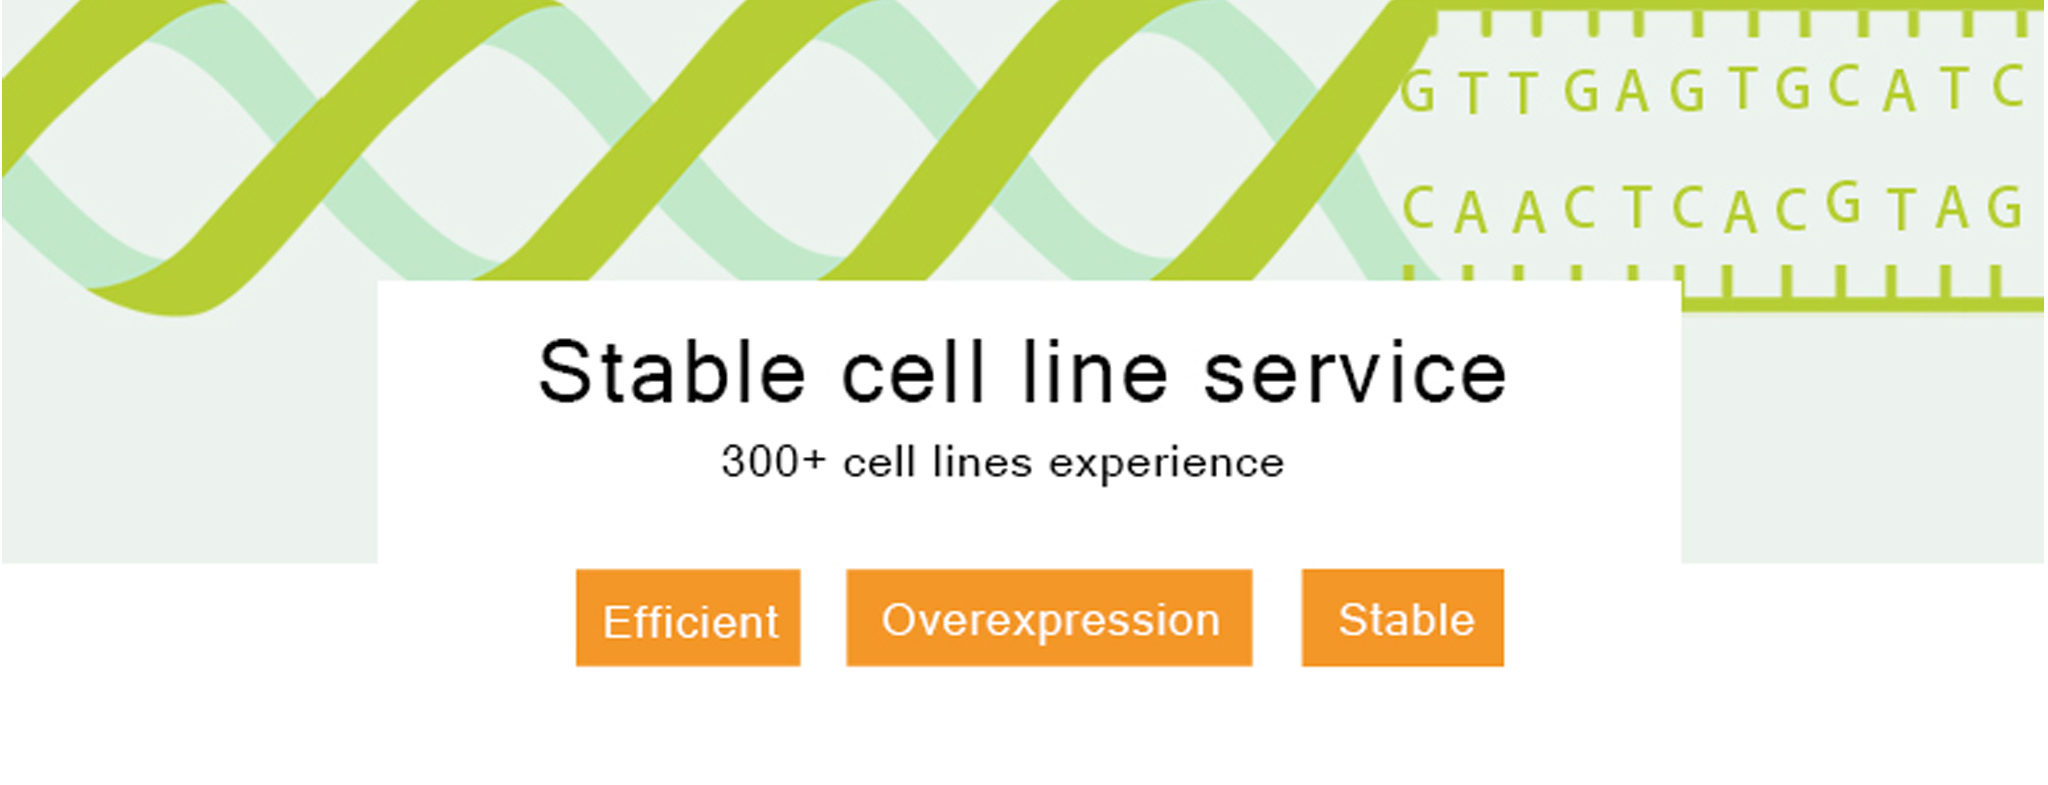 Stable cell line generation service